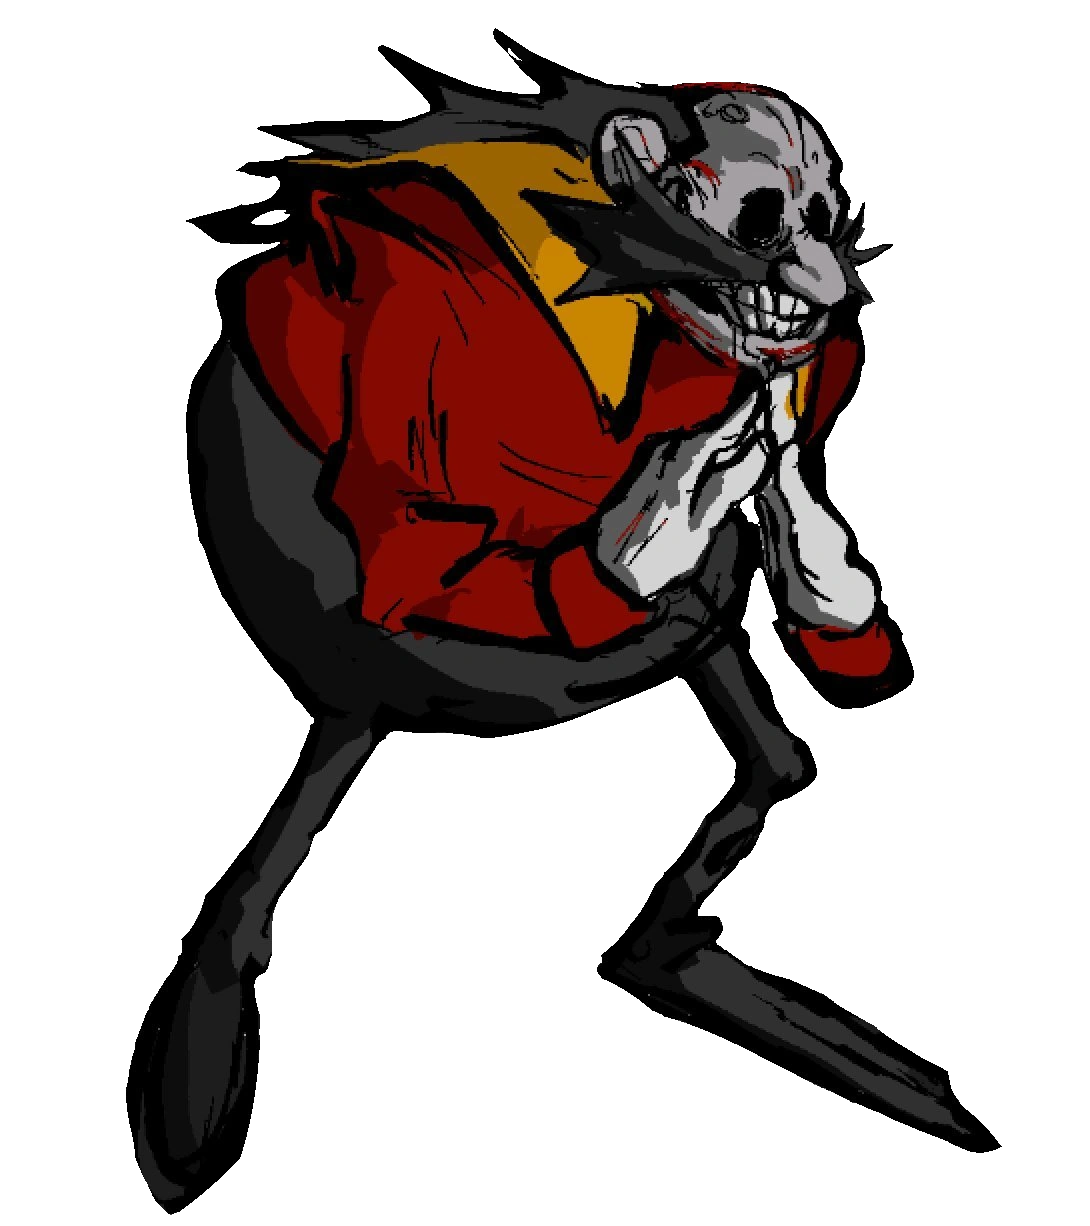 Pixilart - Starved Eggman by The-Bendy-One